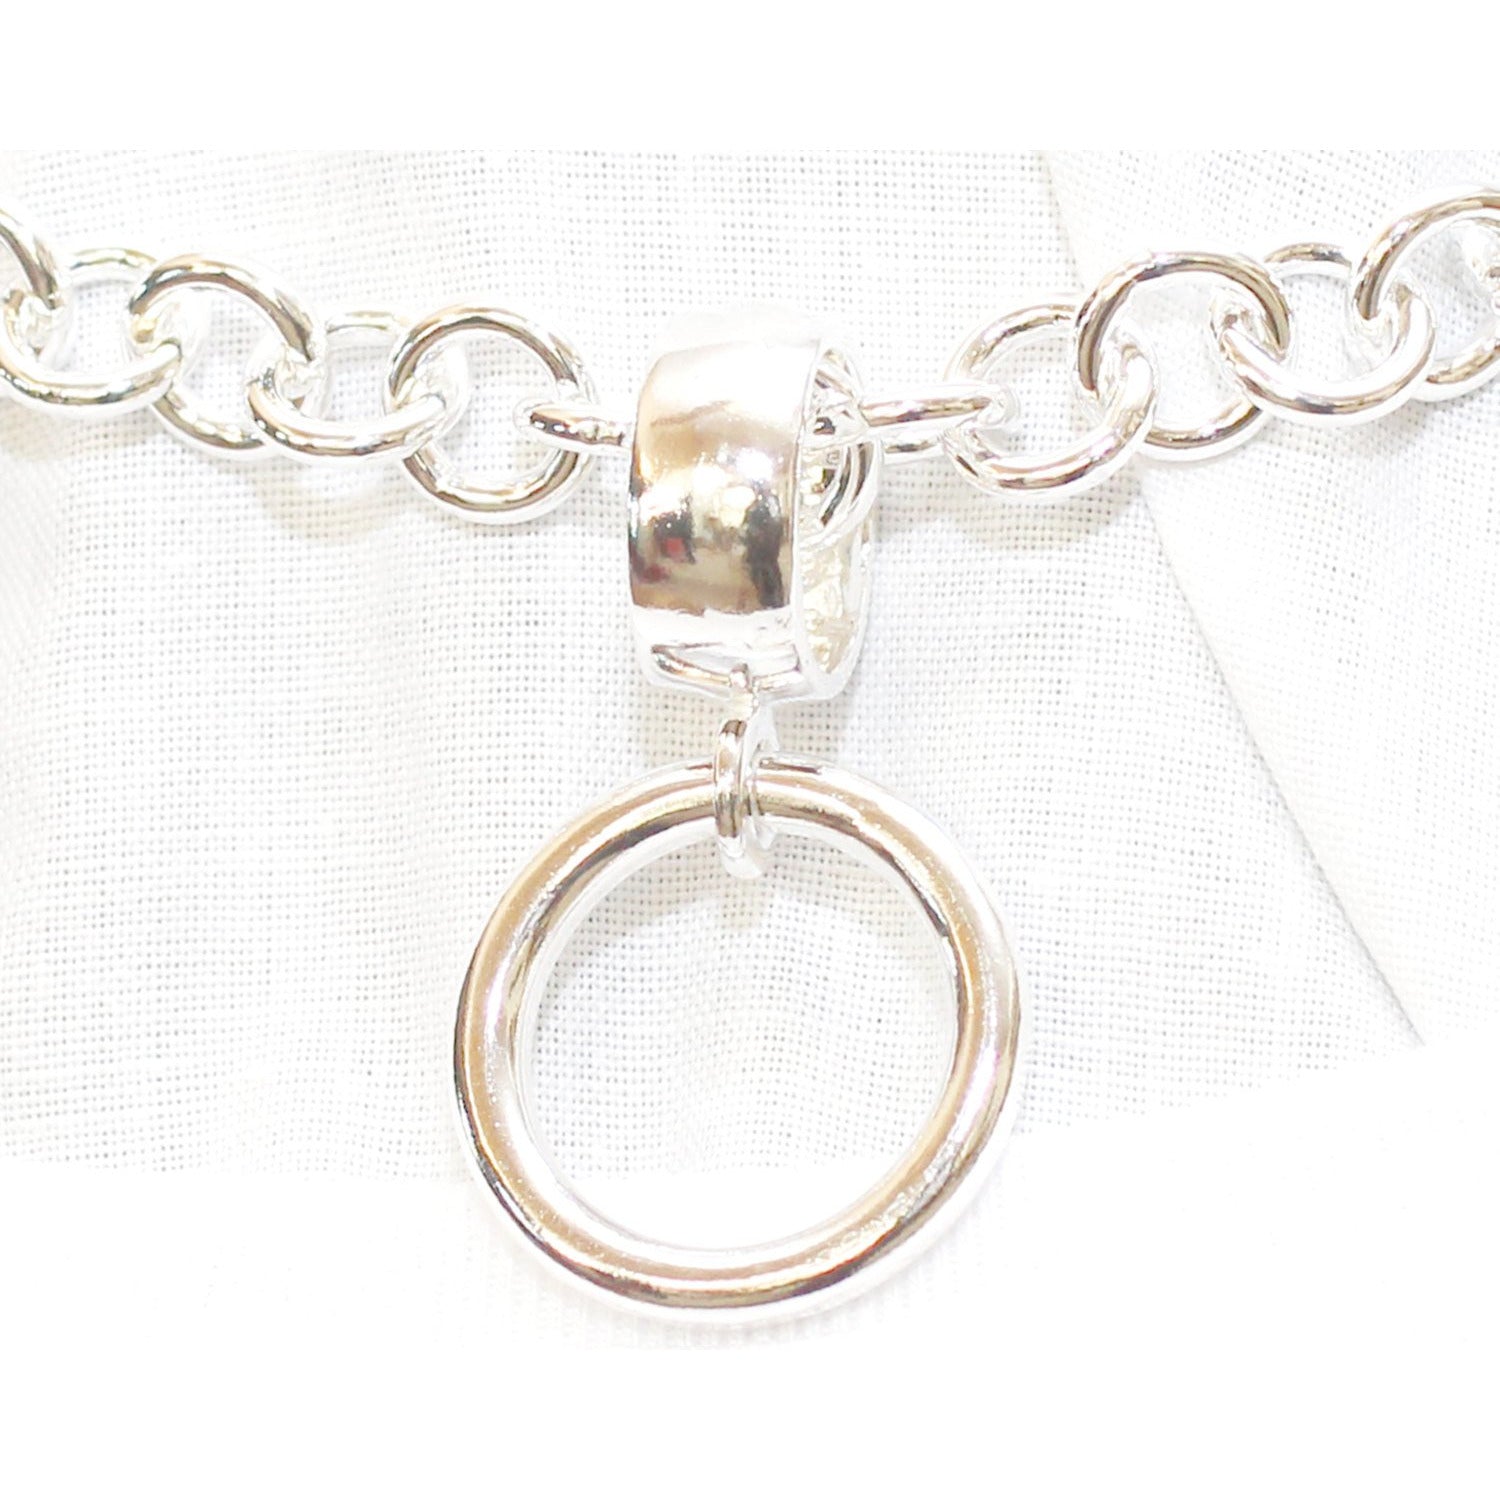 Sterling Silver Collar O Ring, Detachable Collar Ring, Ring Der O, Story of O ring.